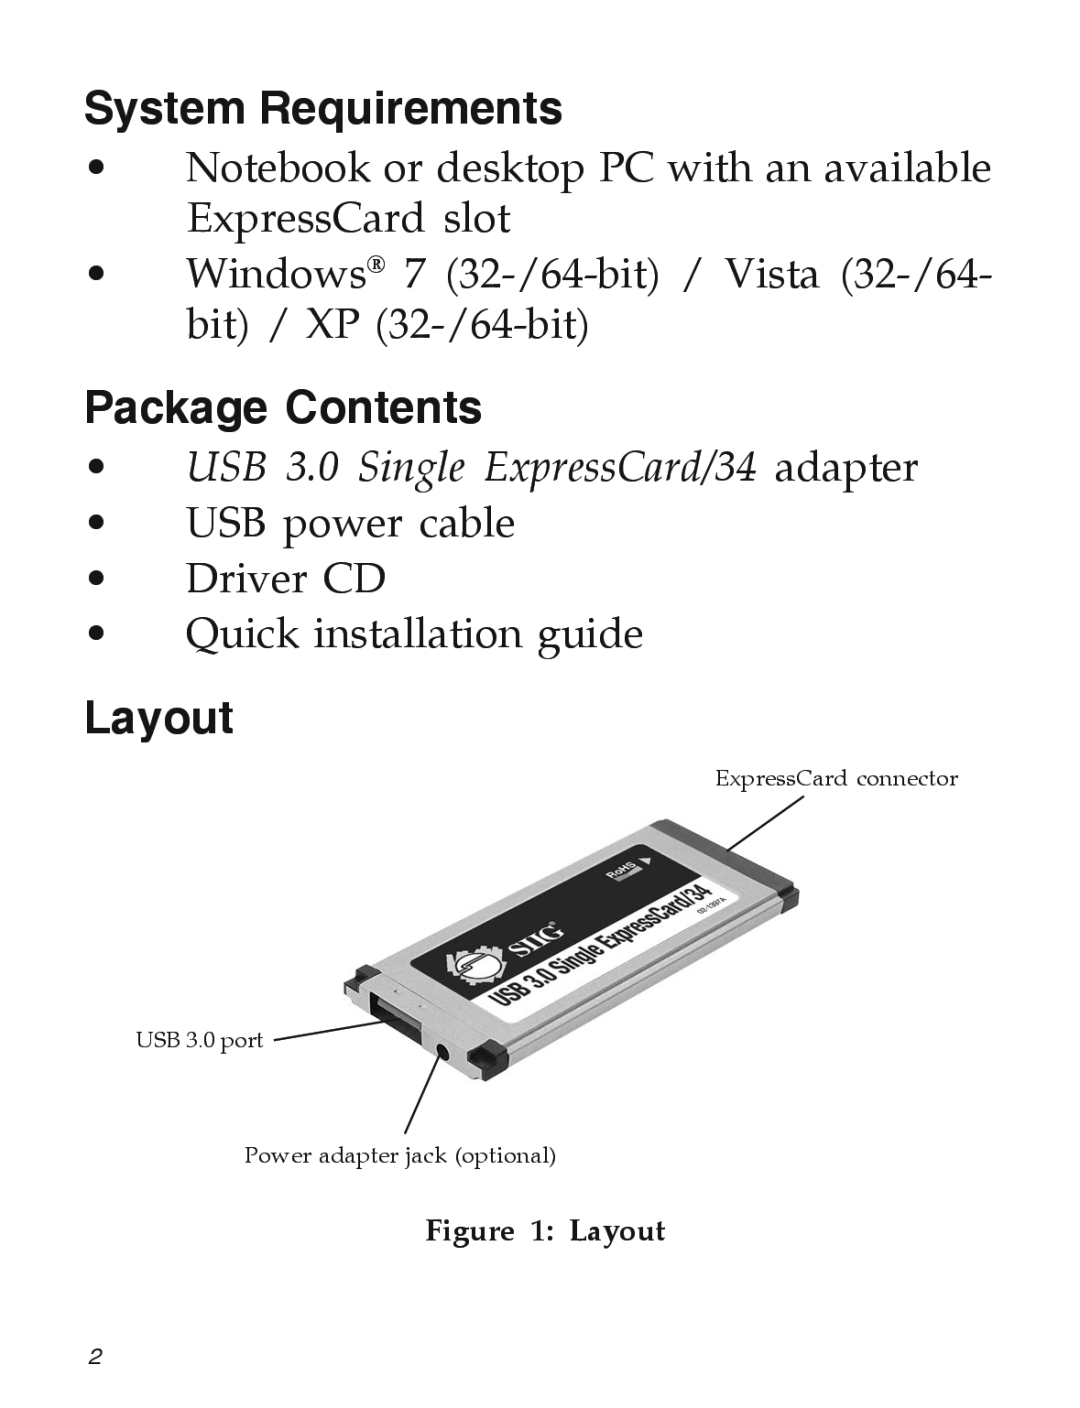 SIIG 5052, 5053 manual System Requirements, Package Contents, Layout, USB 3.0 Single ExpressCard/34 adapter 